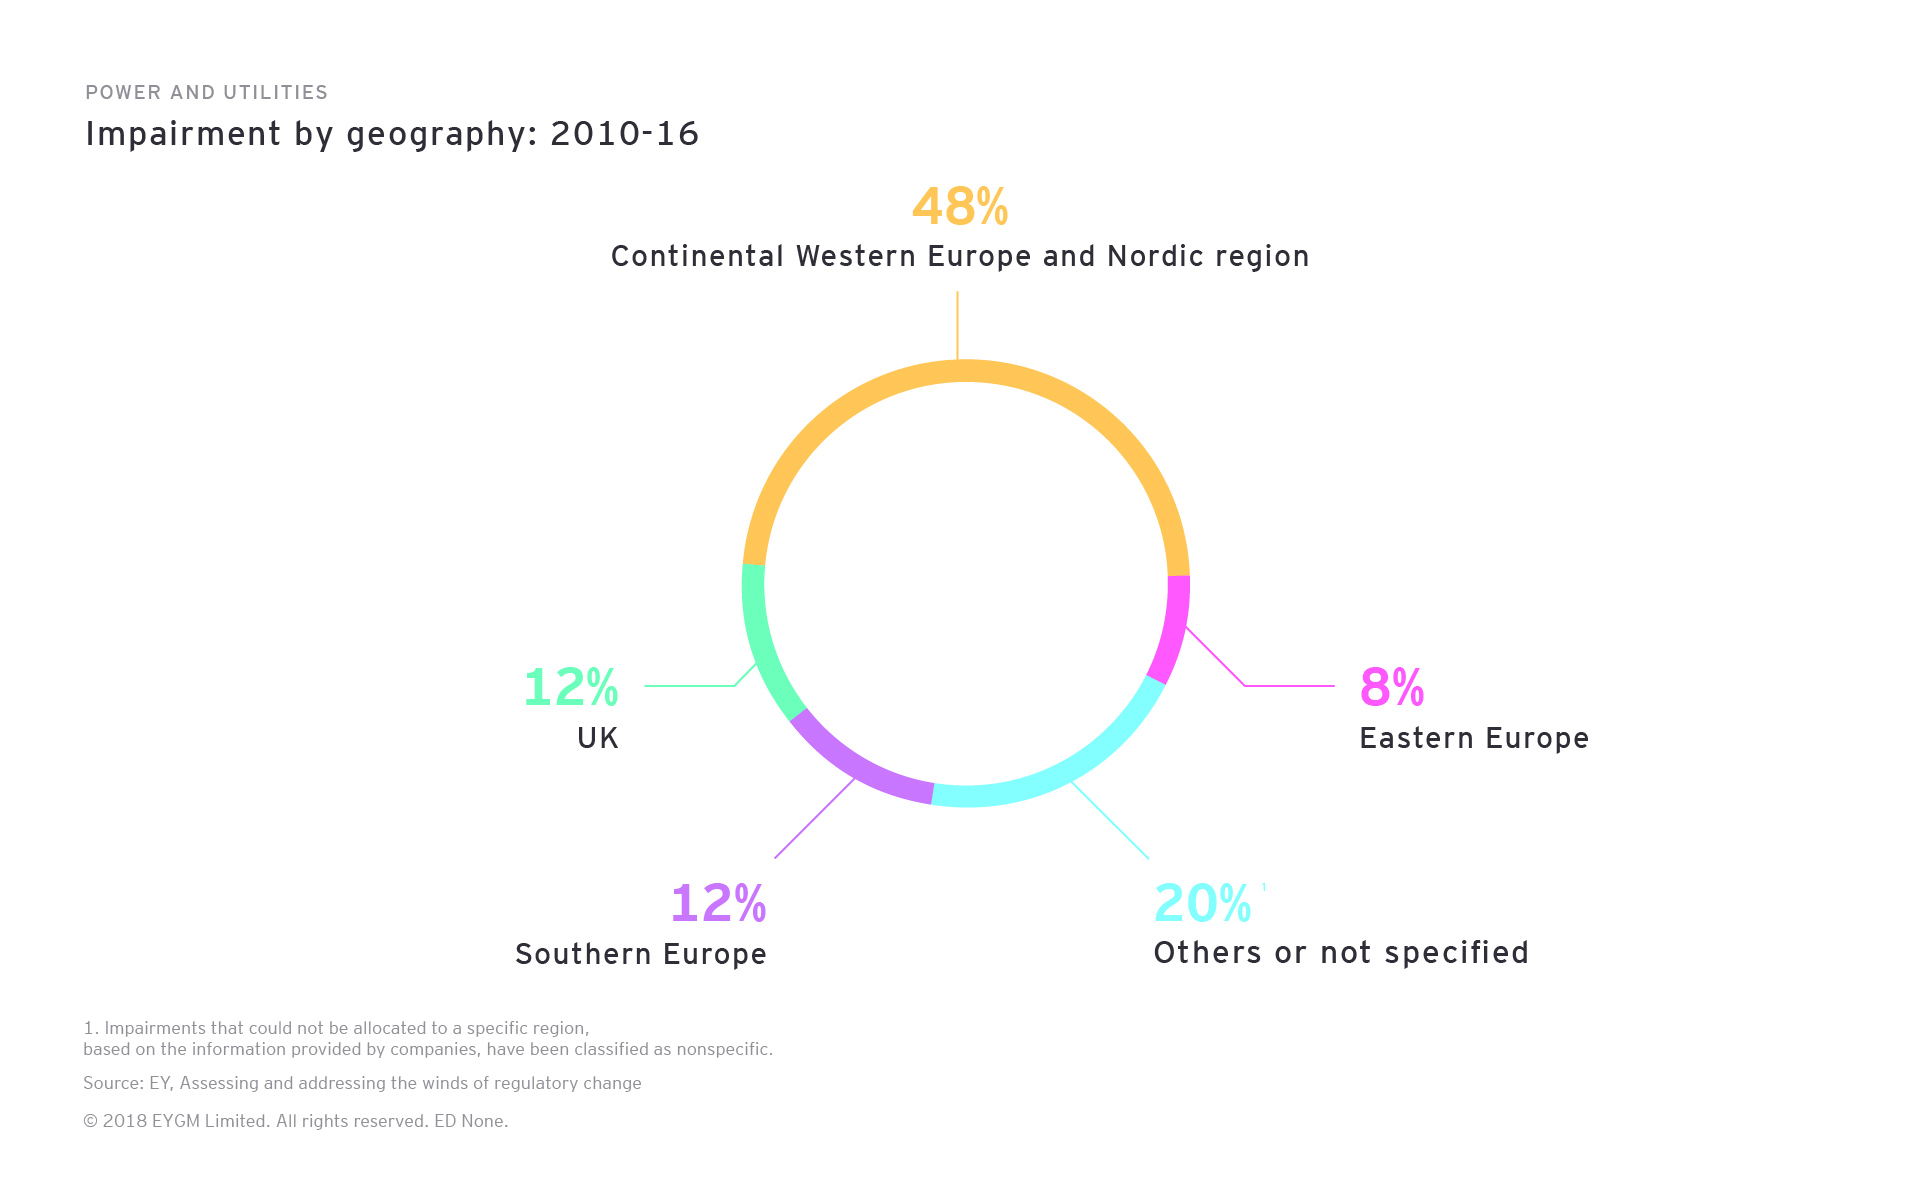 Power and Utilities. Impairment by geography 2010-16